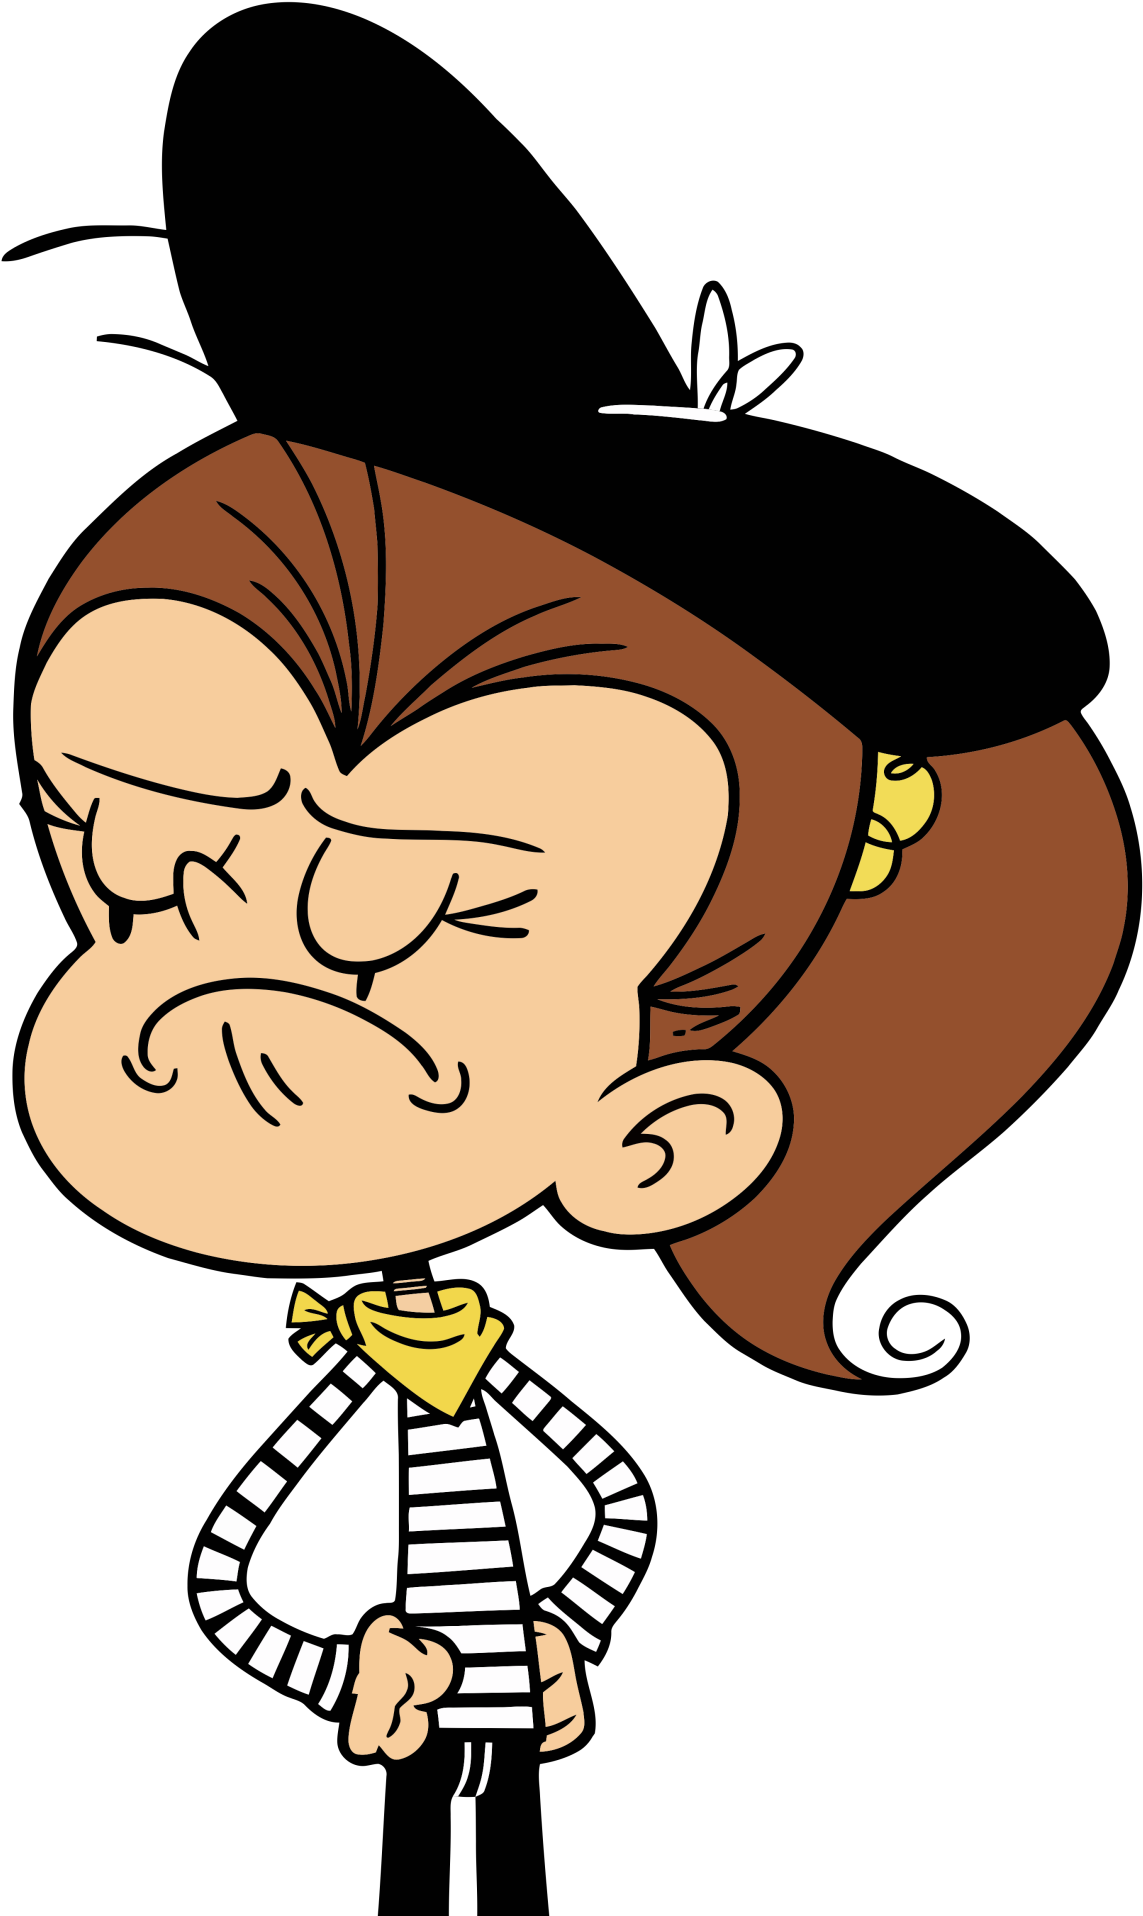 Luan Is Good At Acting Like A Mime - Loud House Luan Mime (1150x1920)